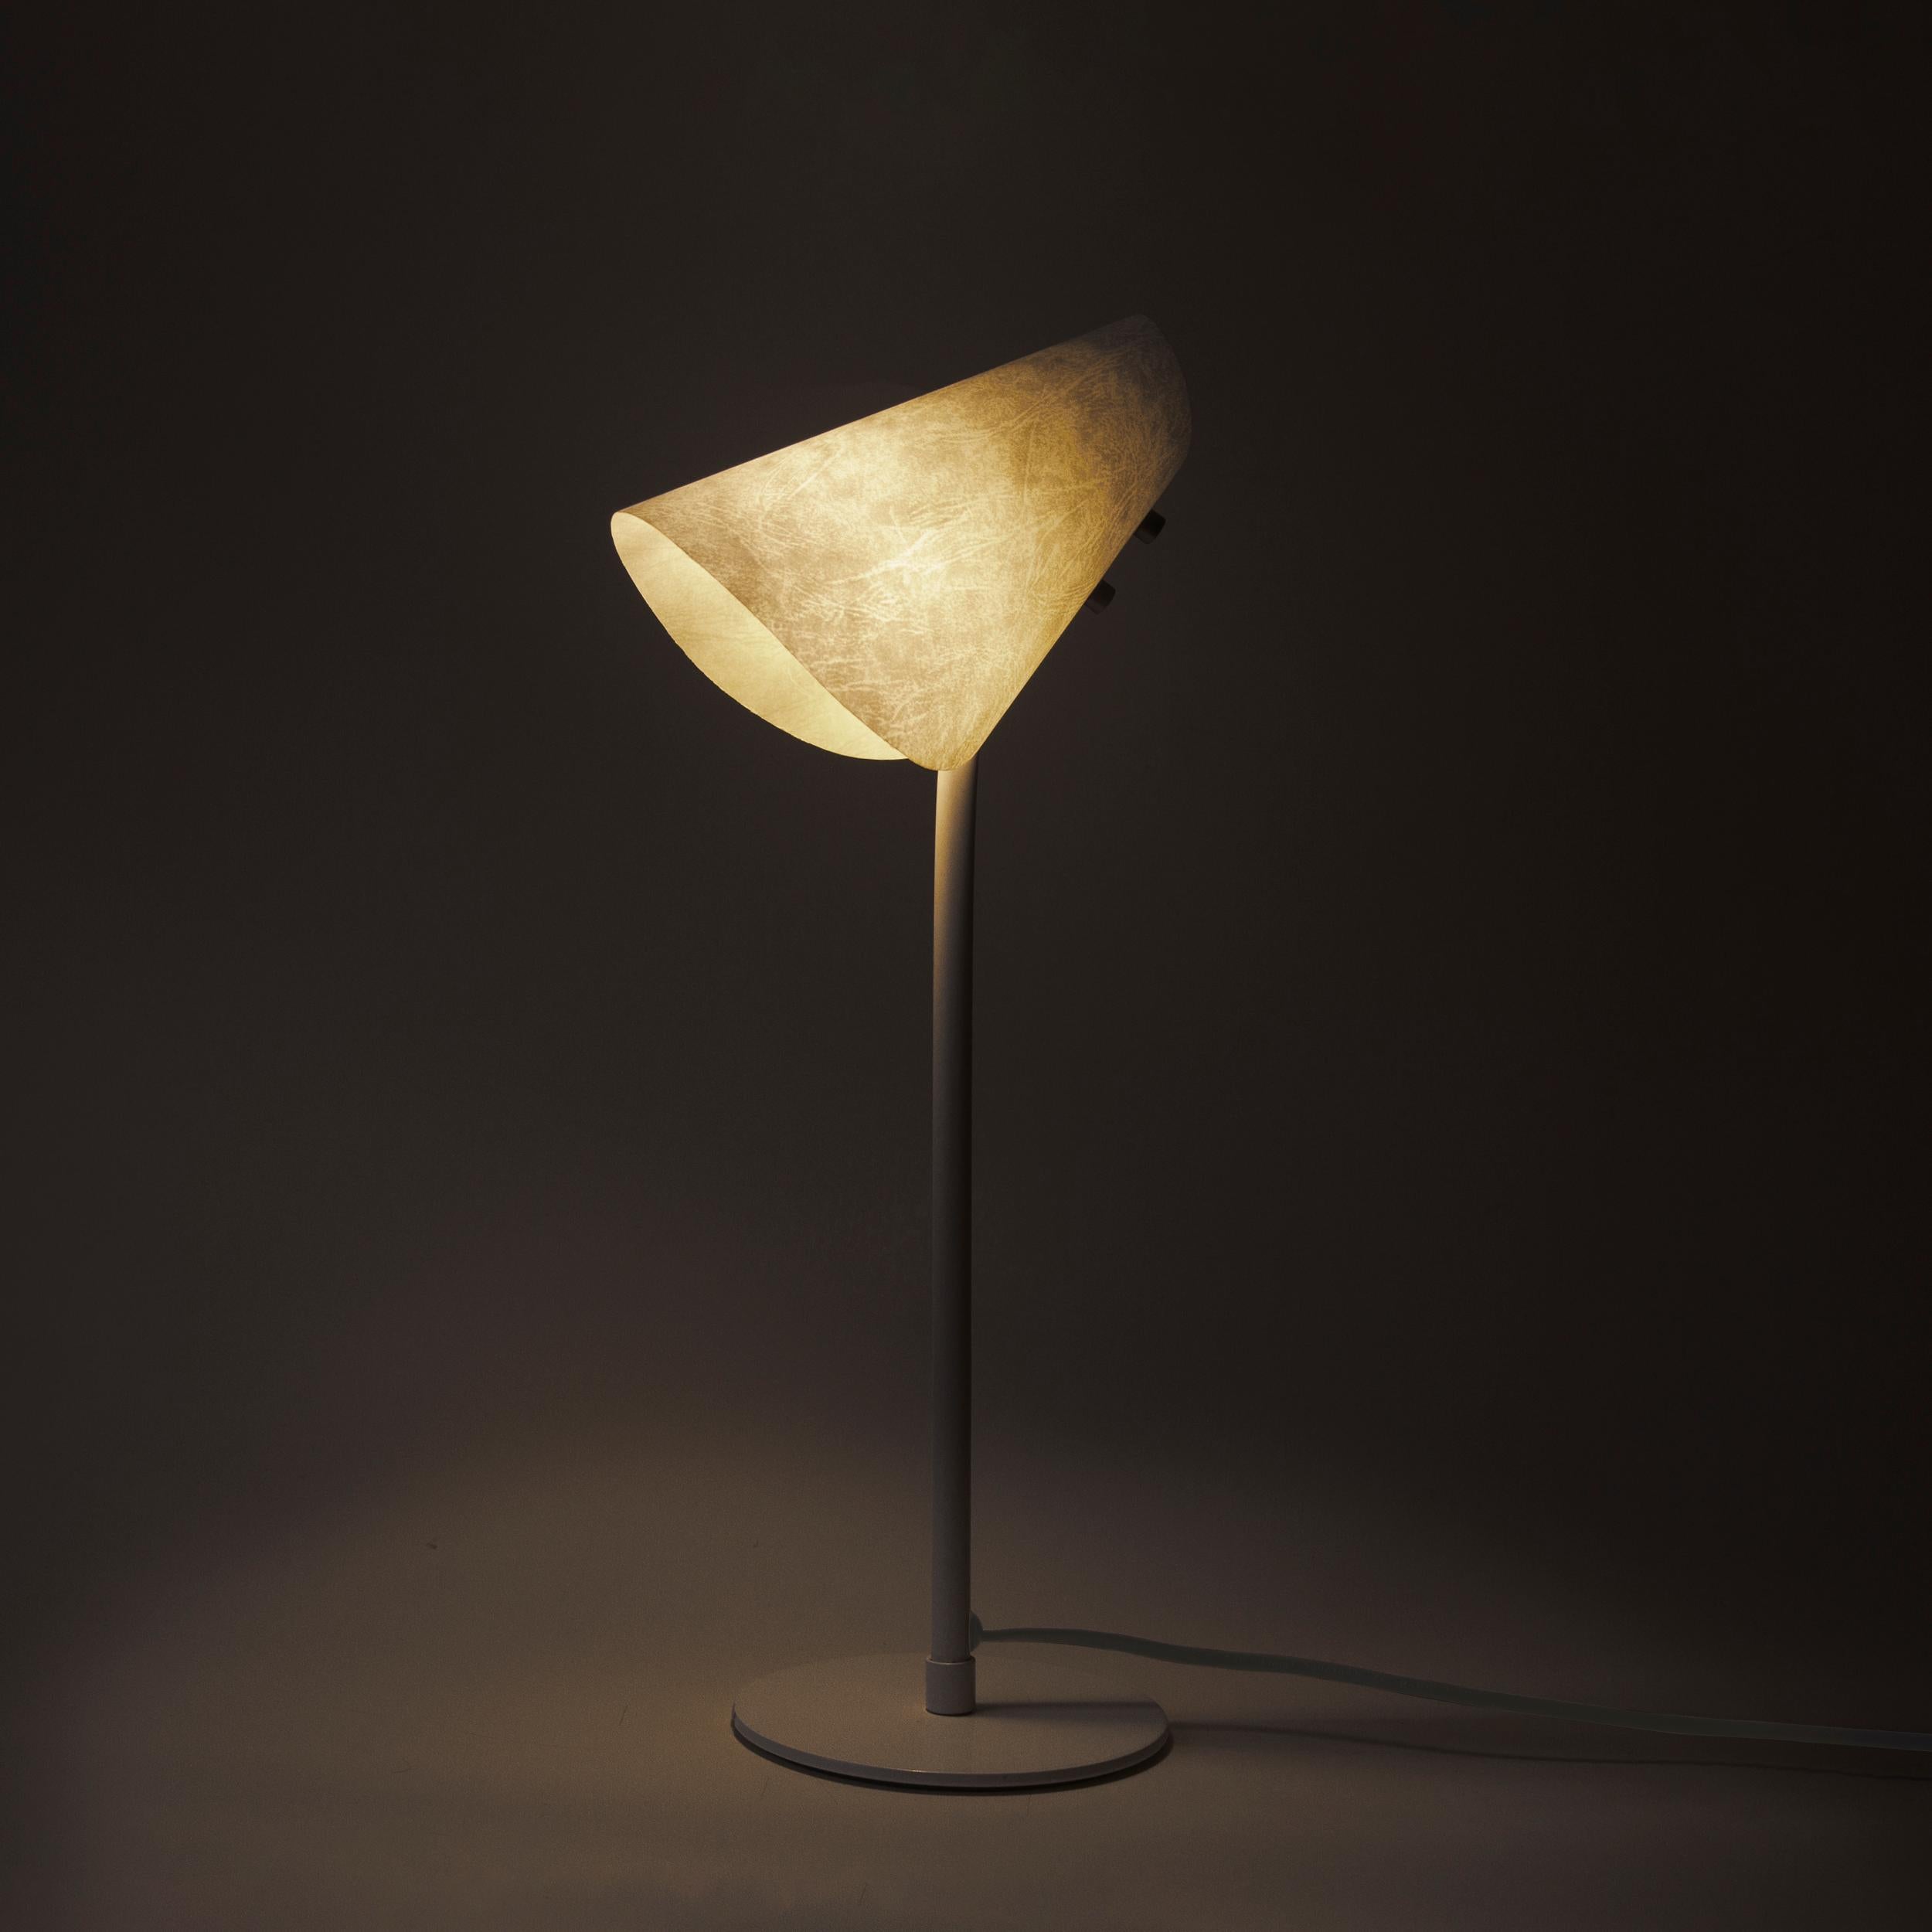 Modern Metal & Parchment Desk Lamp, White, June, Inspired by Handmaid's Tale For Sale